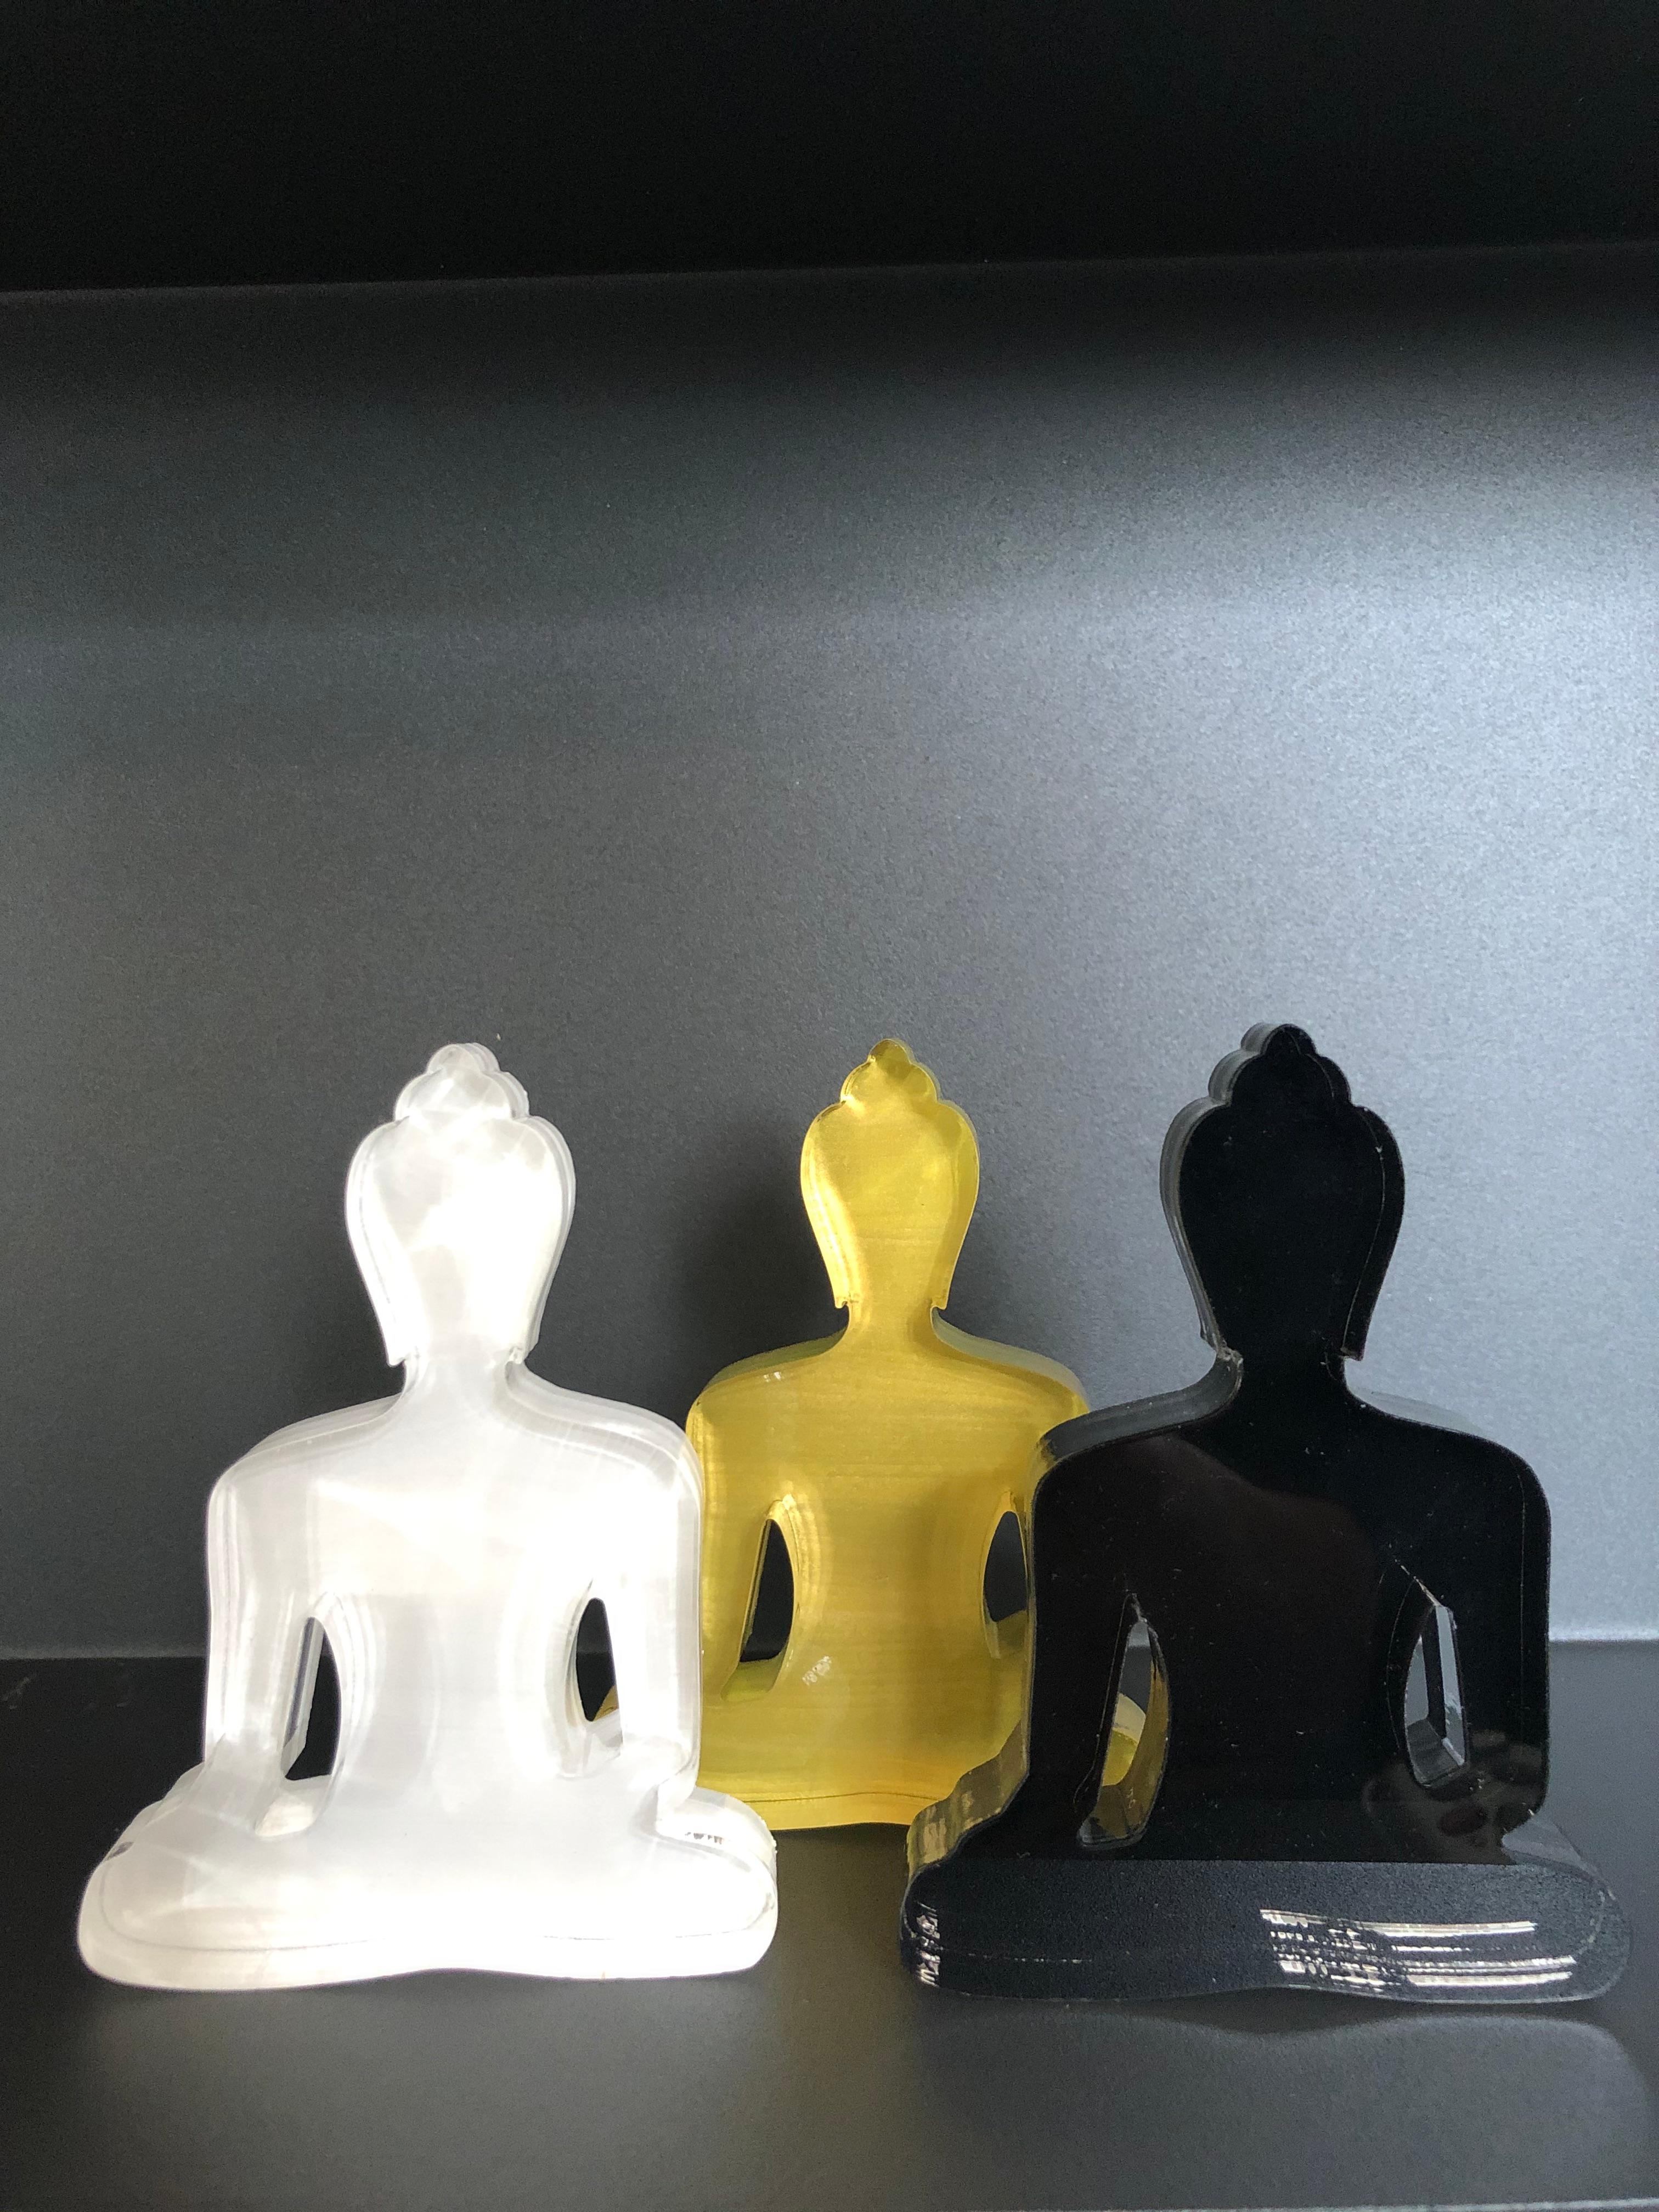 The mini Buddha statues were created by the artist as an everyday reminder to live a compassionate and mindful life. 
The statues are a contemporary design, made of Plexiglas, and hand-painted with love. 
They will add a touch of style and